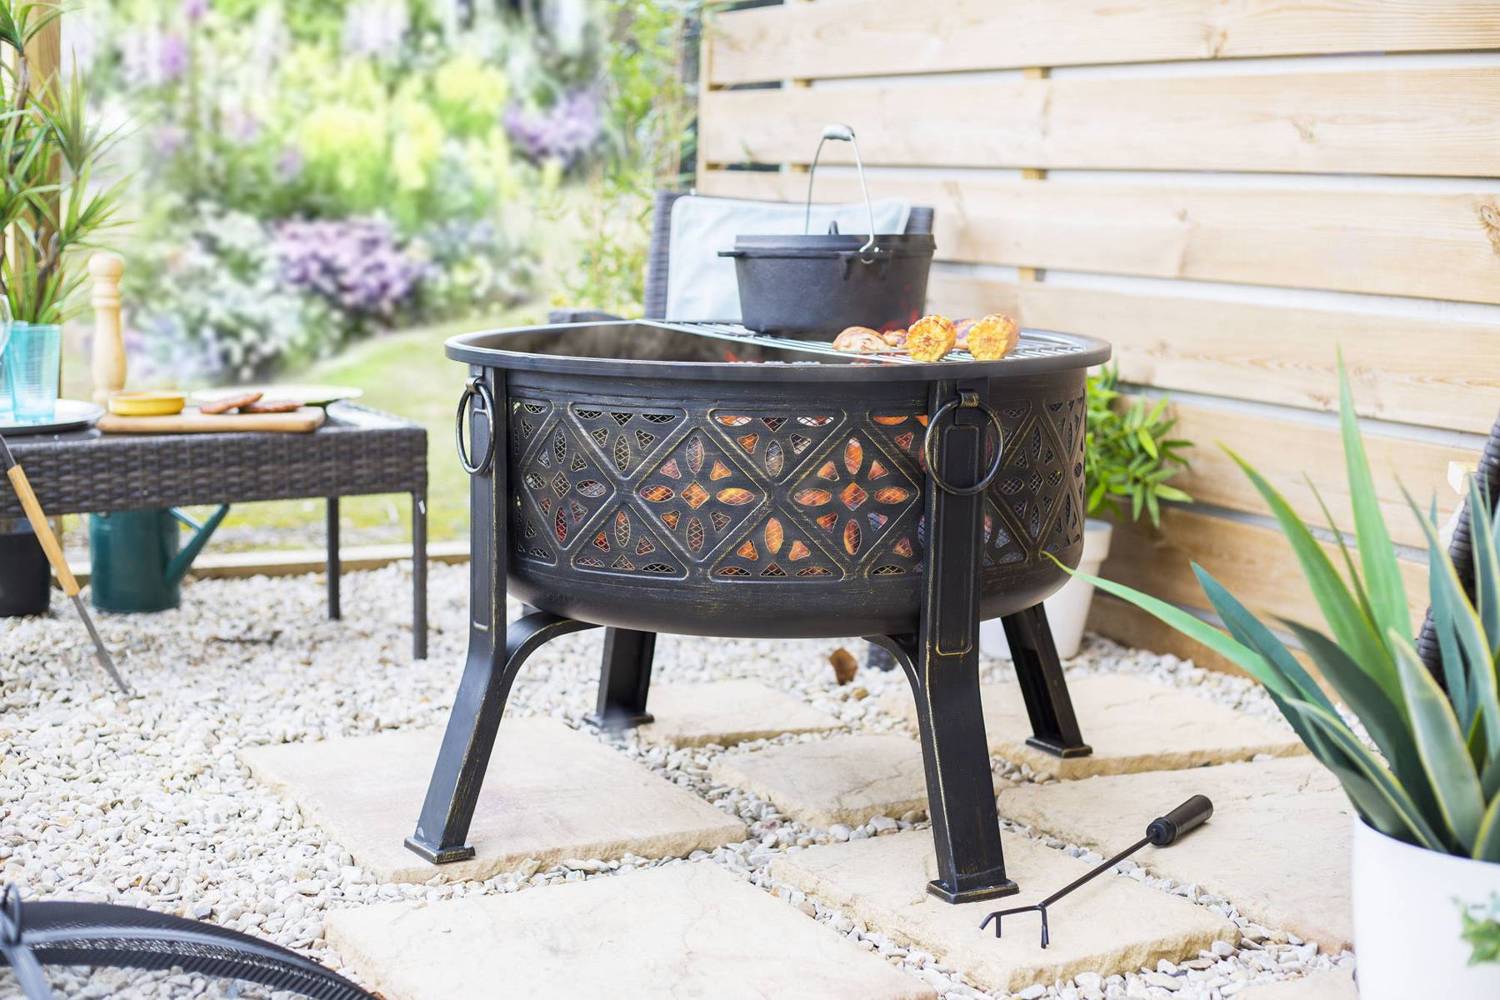 Moresque Steel Garden Firepit with Grill